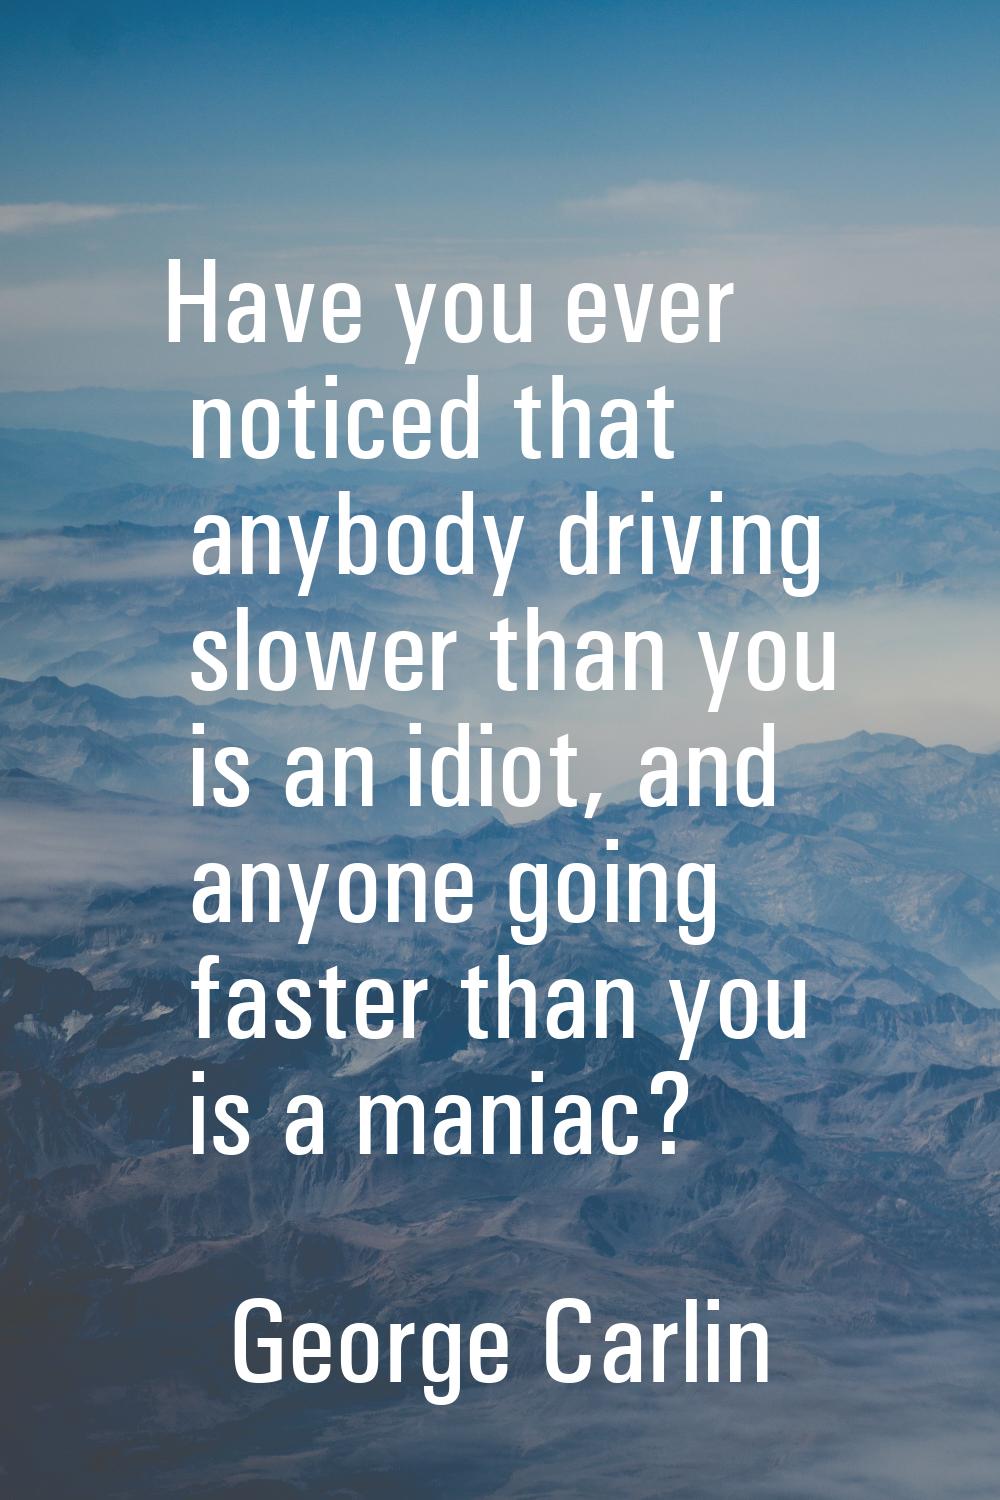 Have you ever noticed that anybody driving slower than you is an idiot, and anyone going faster tha